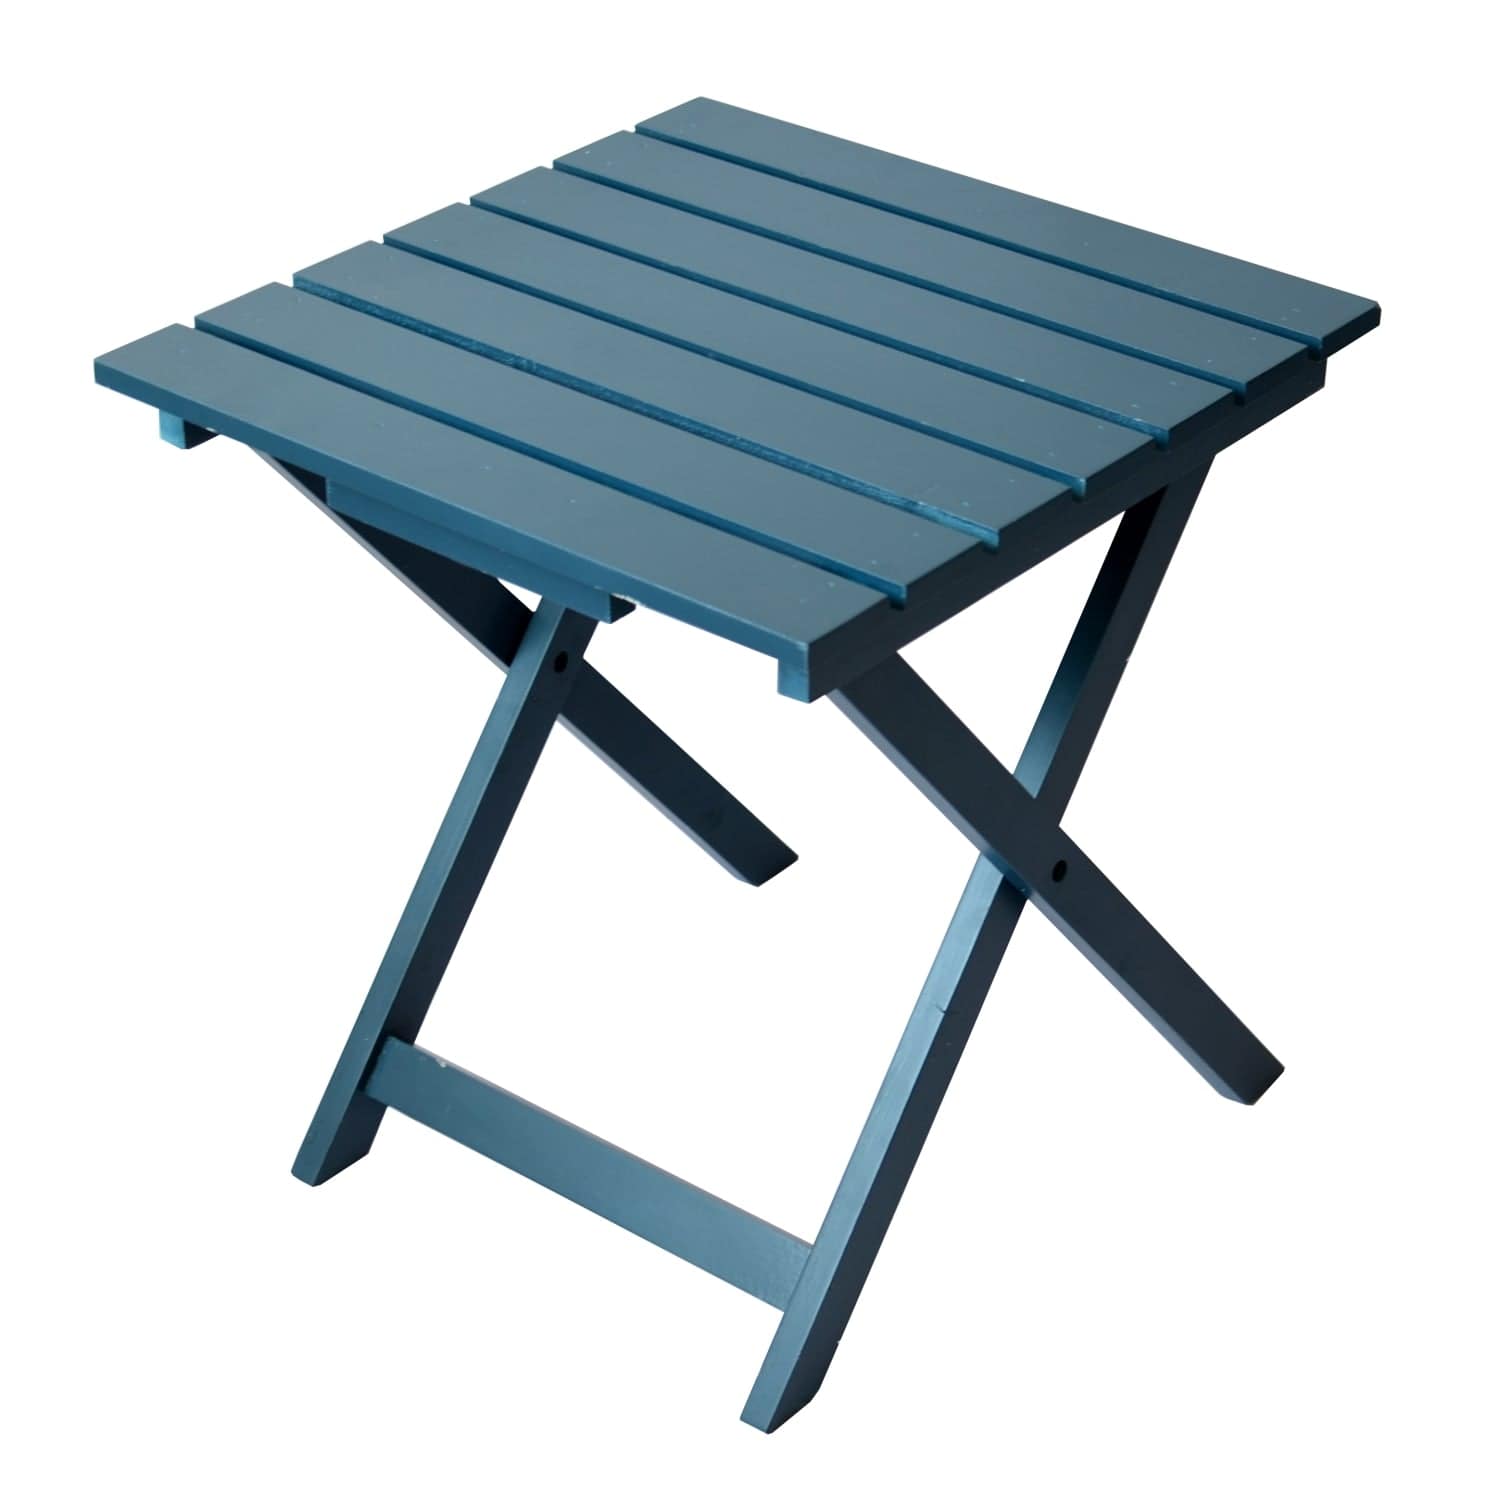 Riverstone Industries Outdoor Chairs Riverstone | Adirondack Chair with Side Table - Navy Blue RSI-AC-NB-T